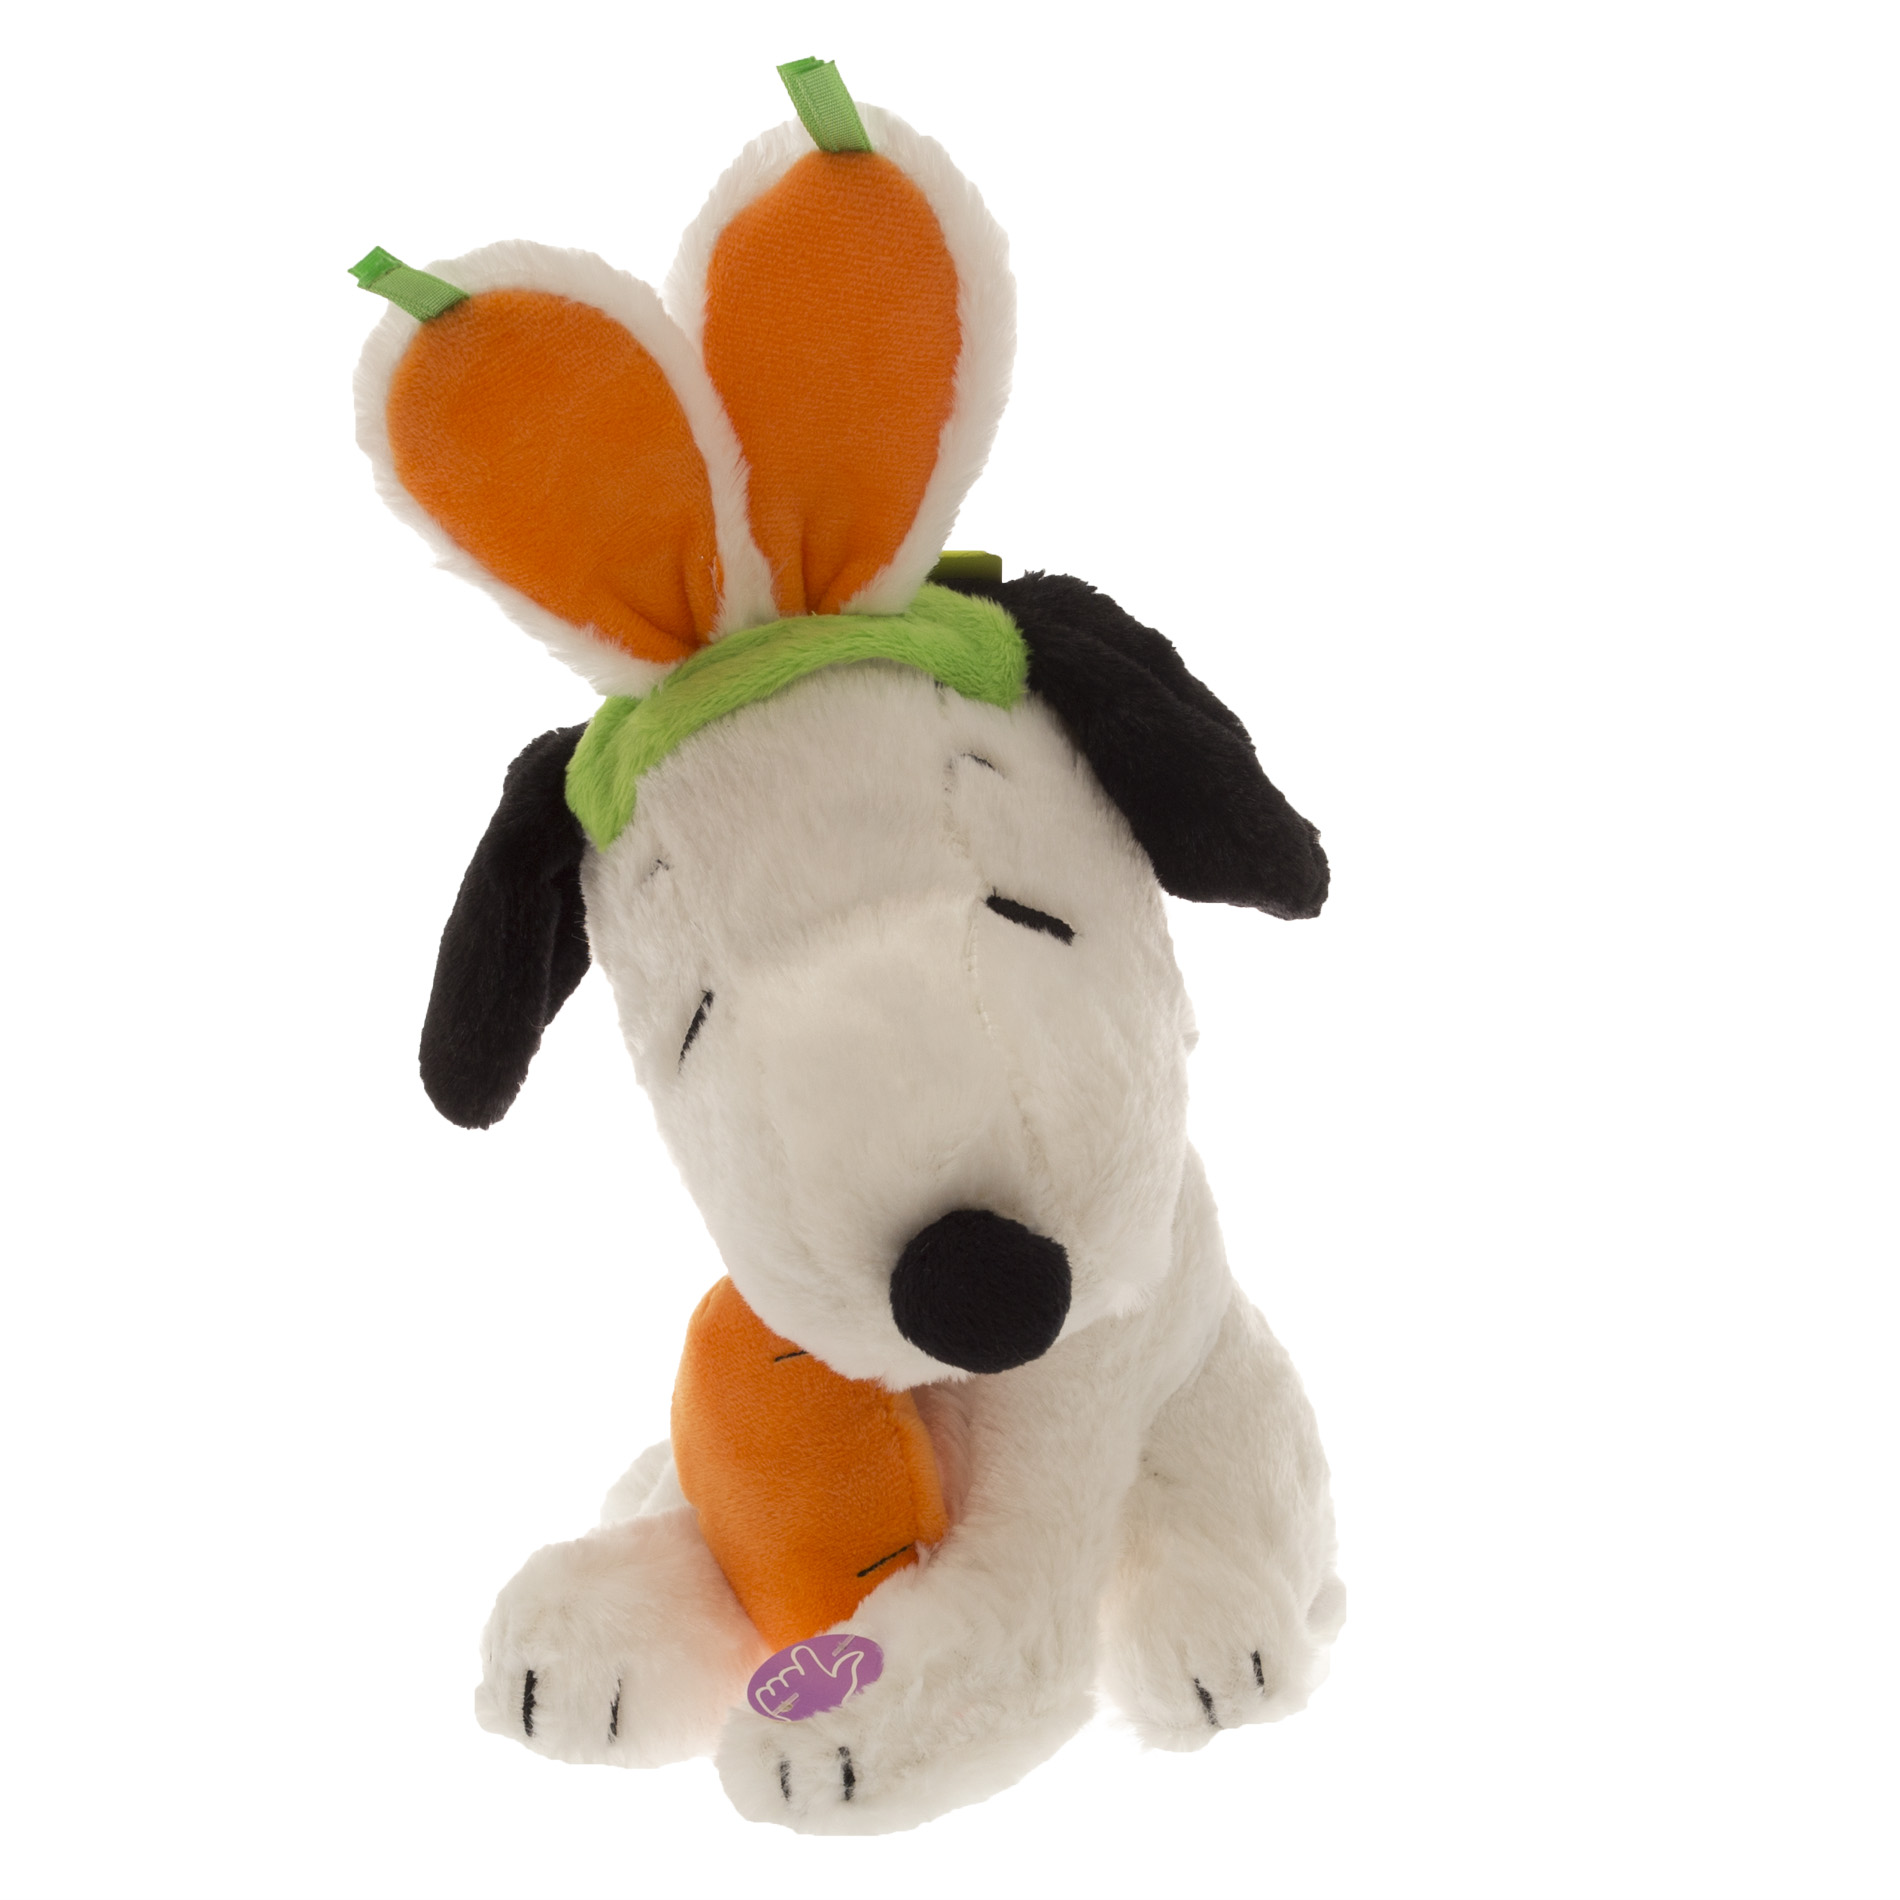 Peanuts By Schulz Singing Snoopy with carrot ears